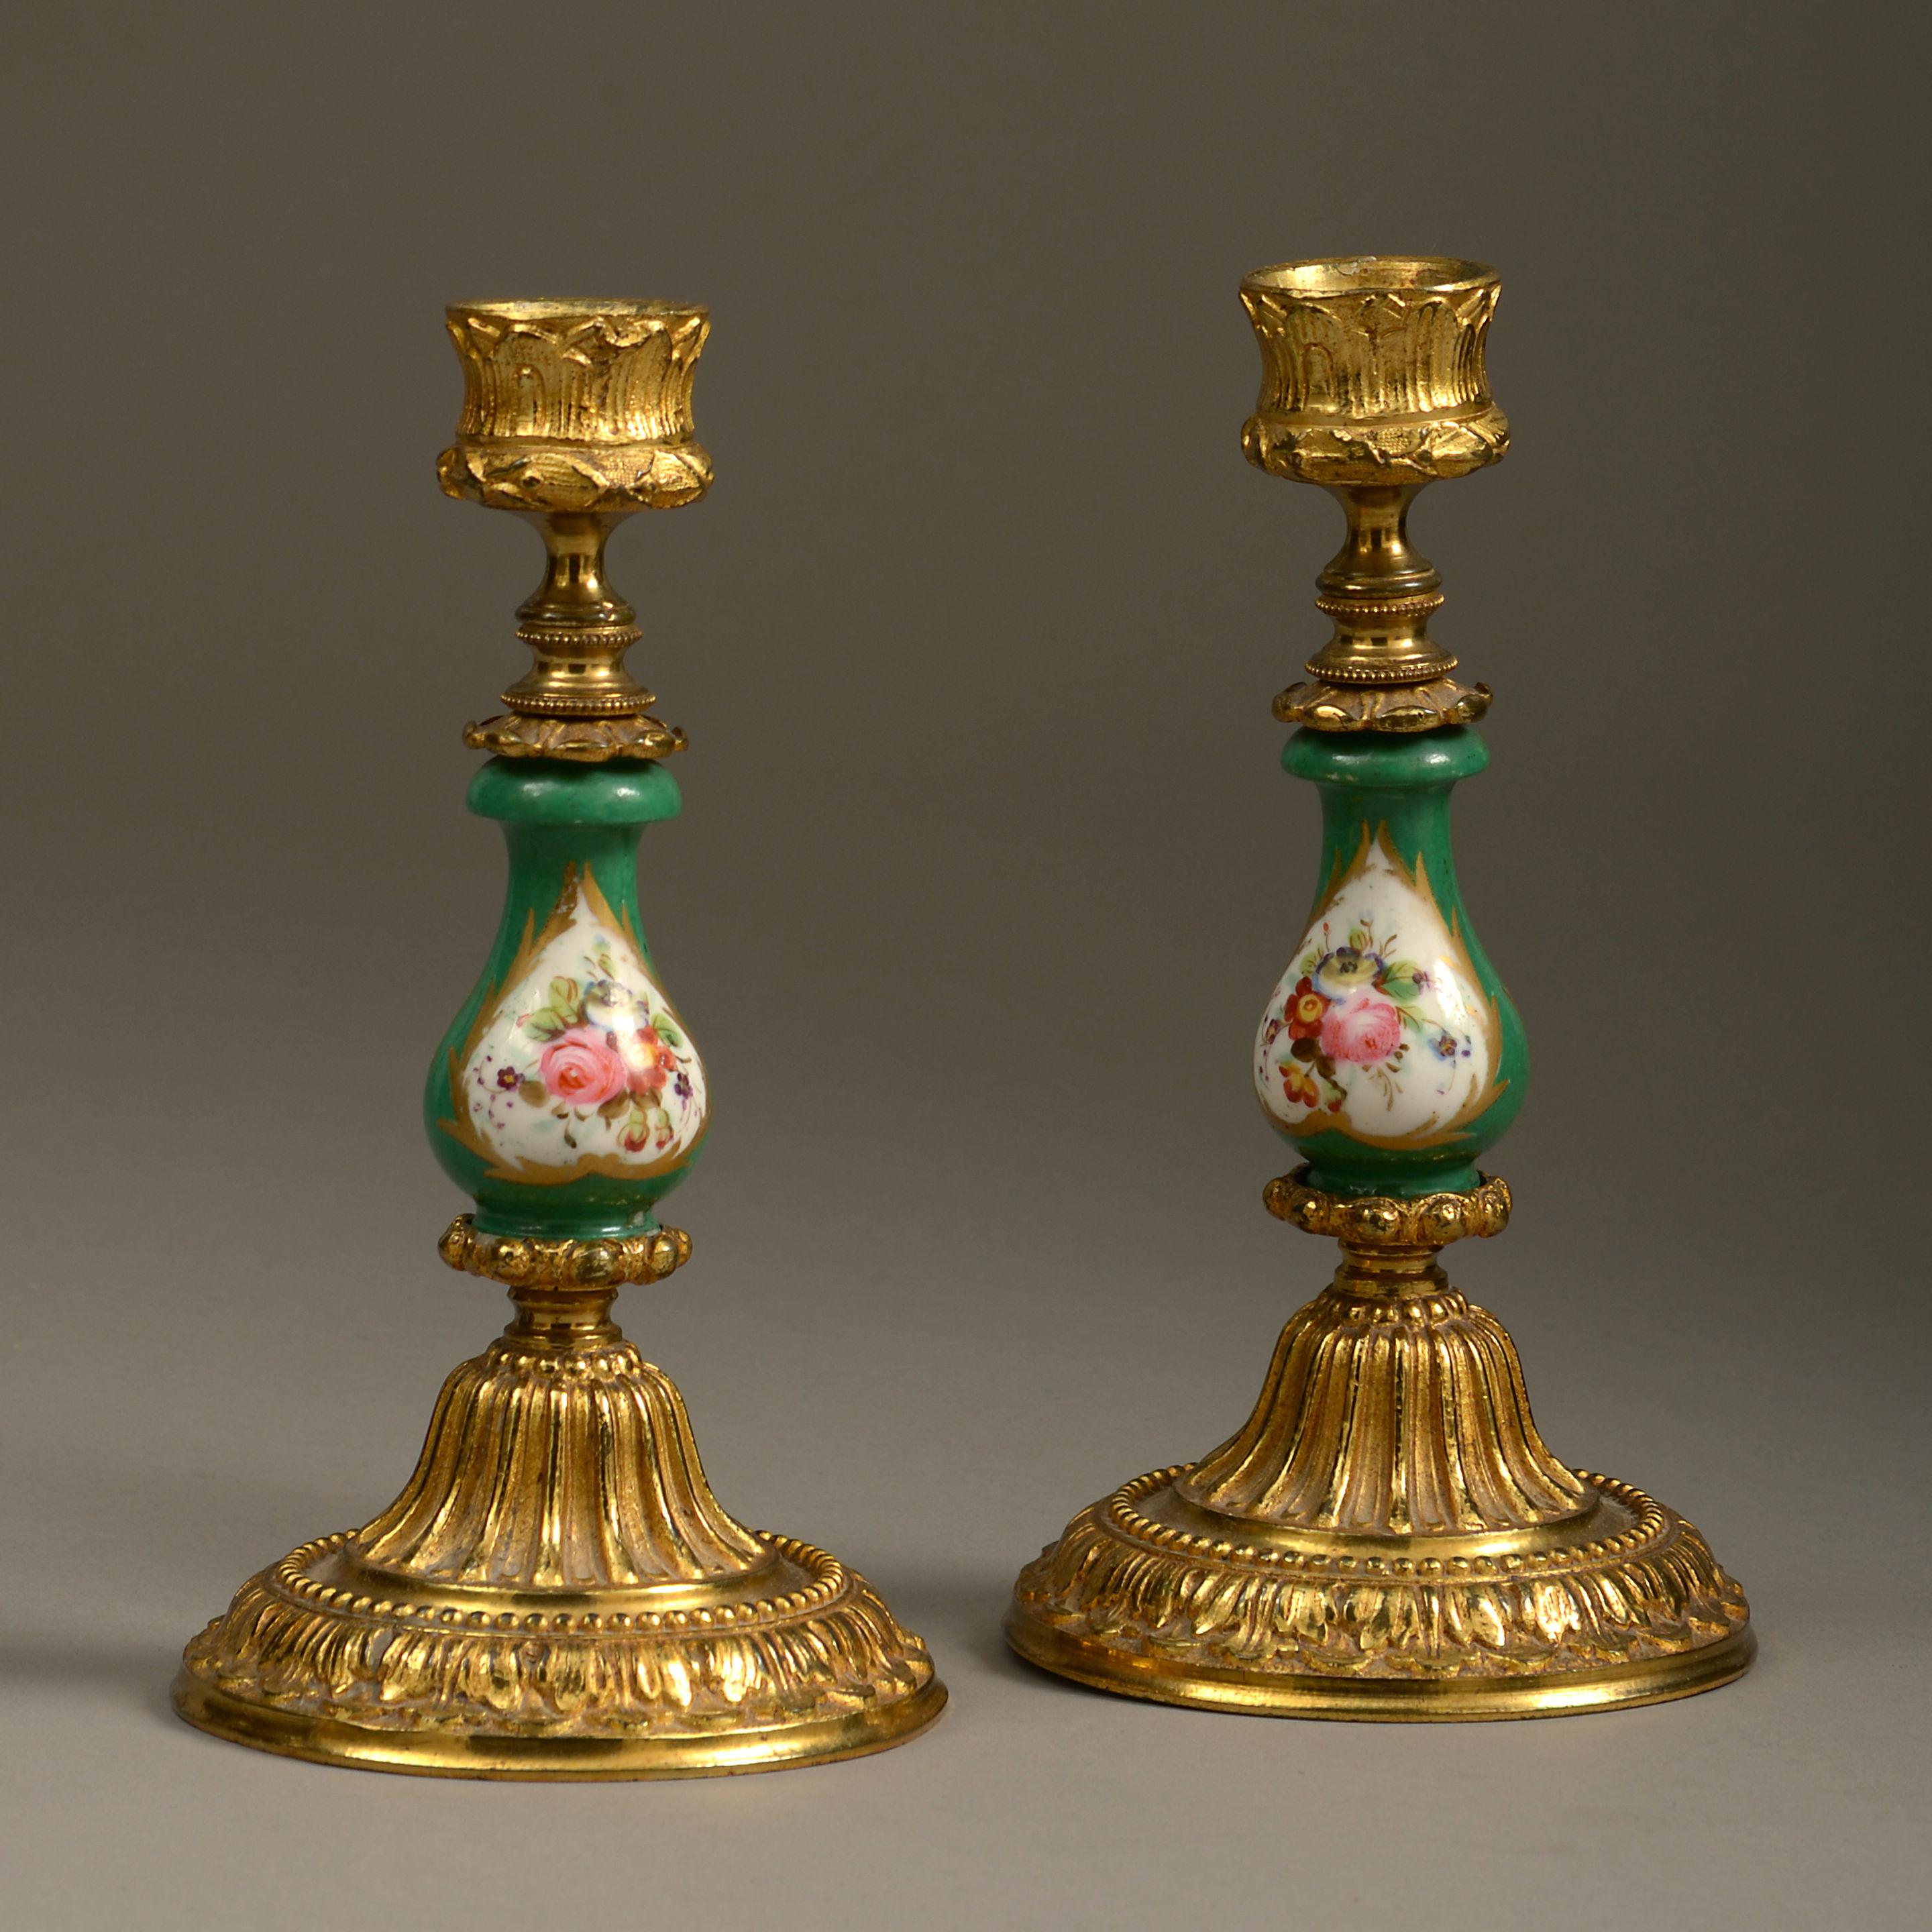 A mid-19th century pair of candlesticks, having ormolu socles and bases in the Louis XVI manner, the stems of Sèvres Porcelain having floral cartouches on a green ground in the Rococo taste.